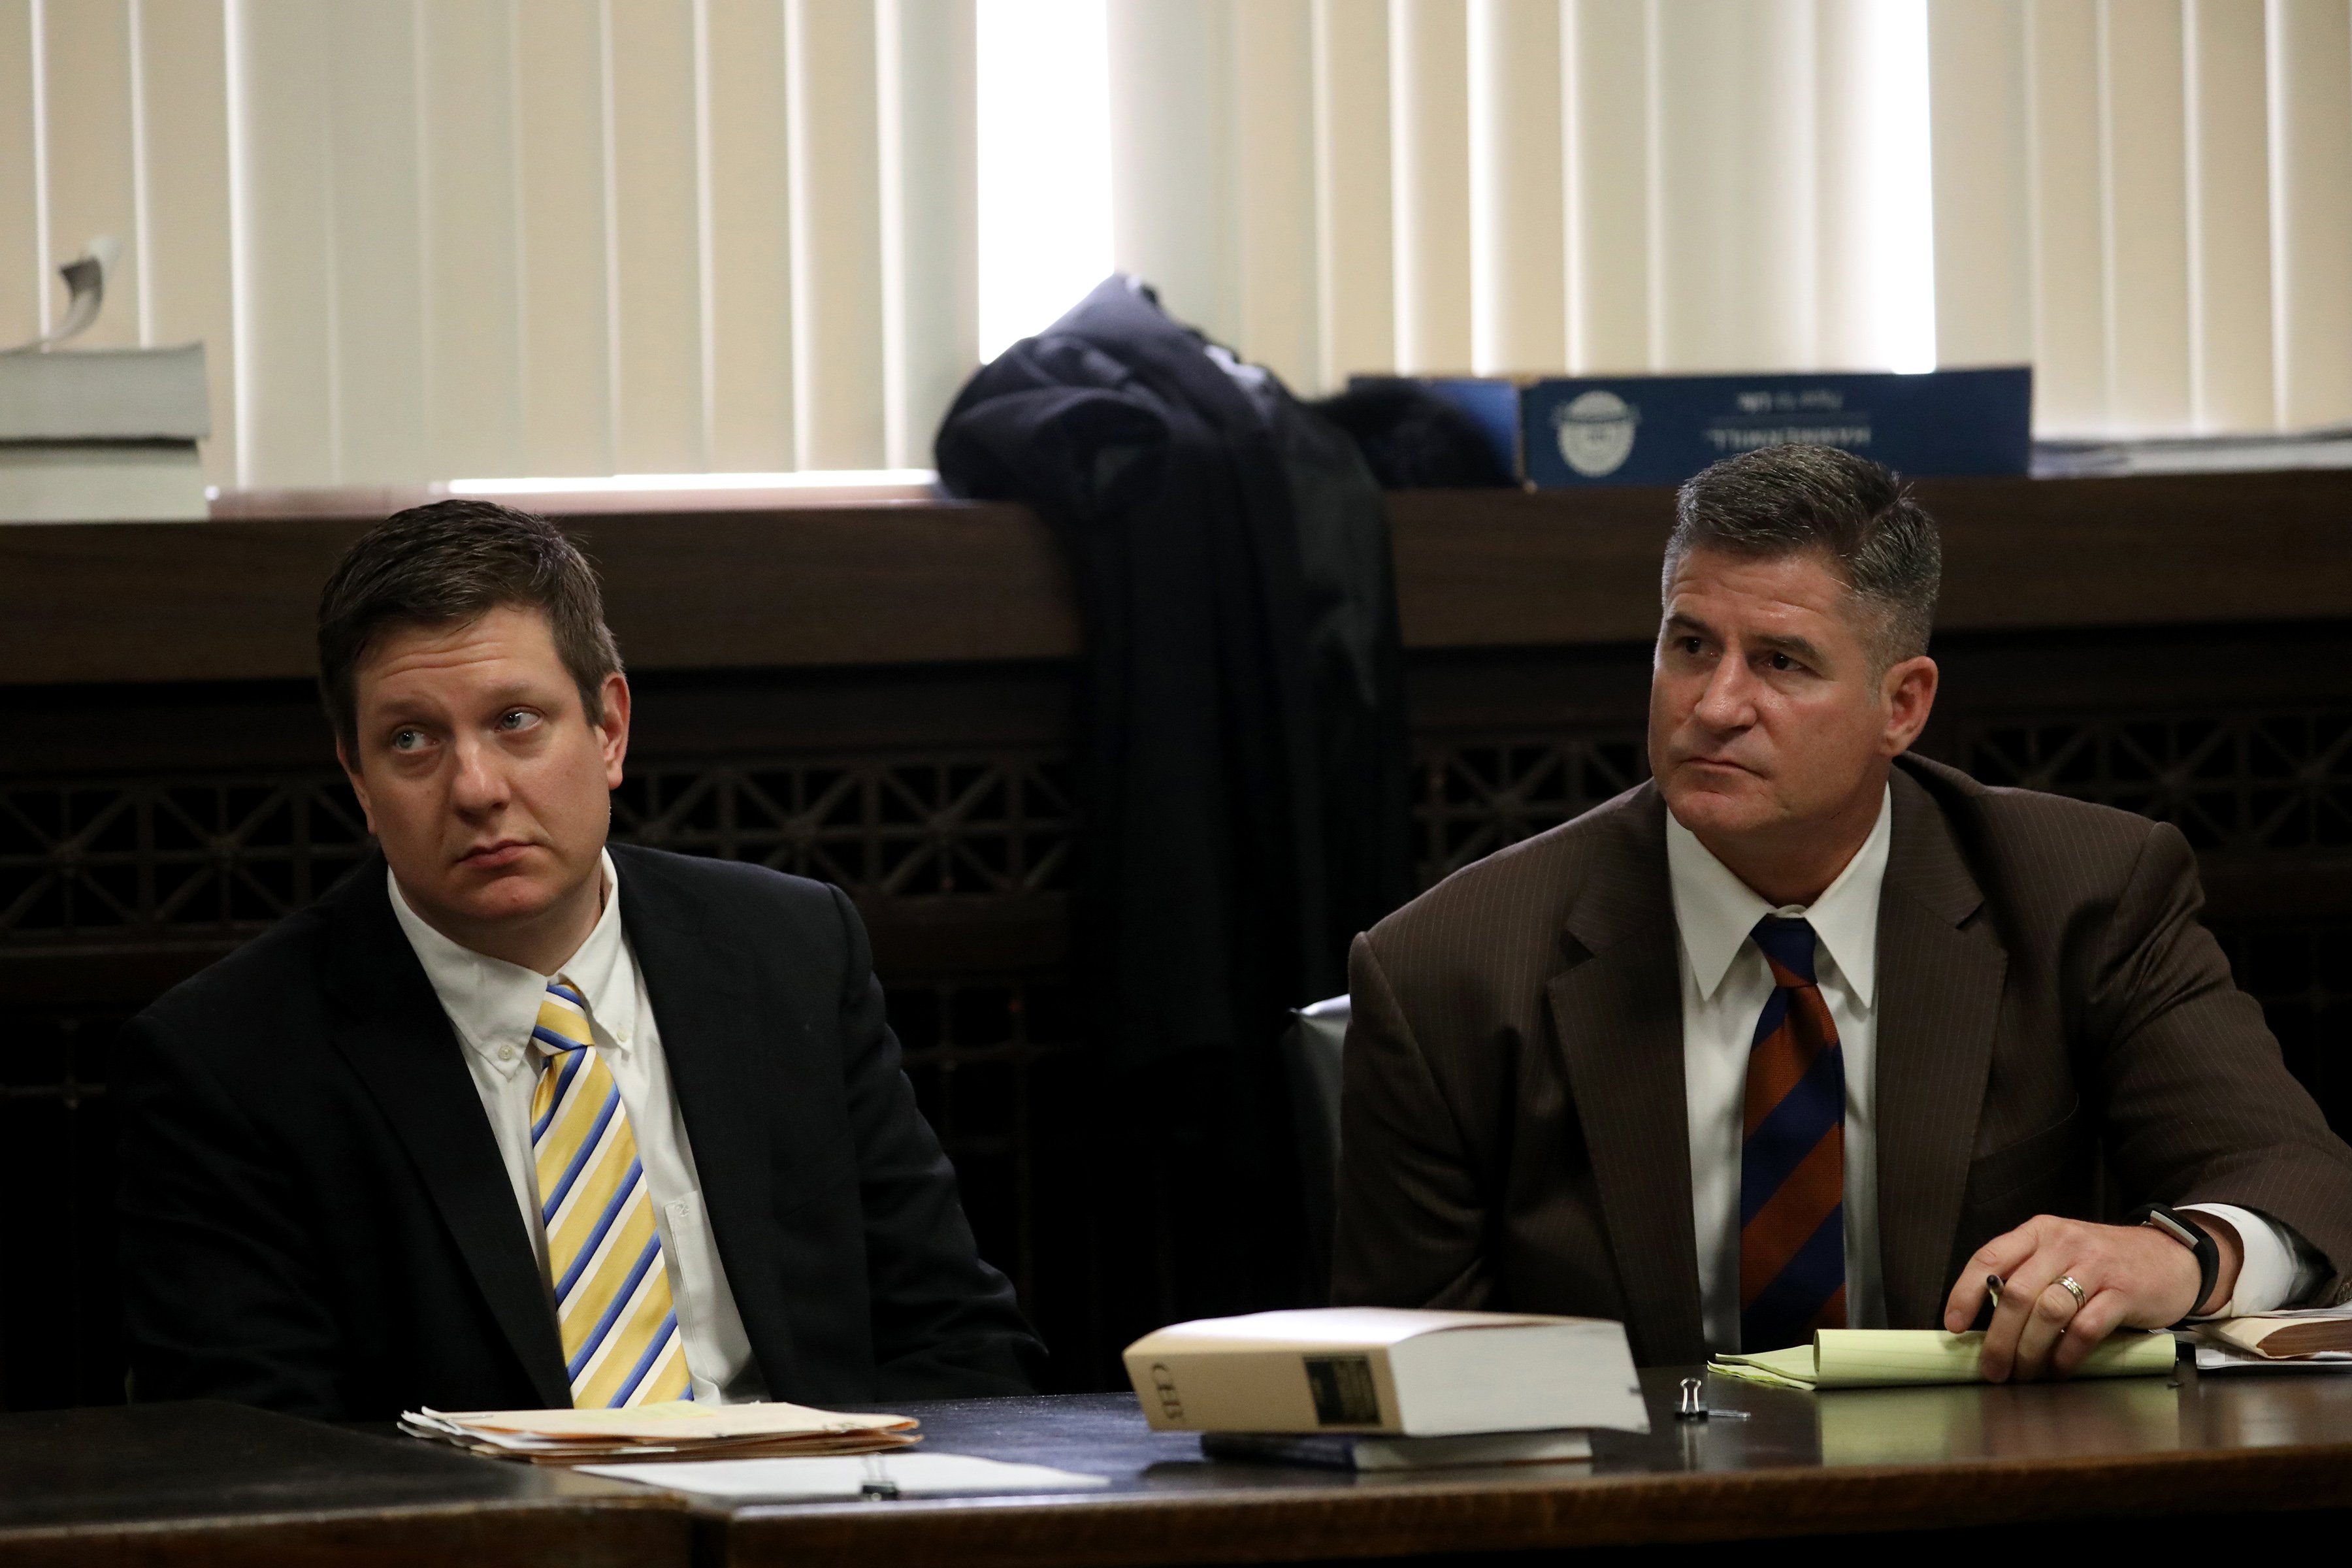 Jason Van Dyke, left, sits with his attorney Daniel Herbert at a hearing at Leighton Criminal Court in Chicago on Wednesday, April 18, 2018. (Nancy Stone / Chicago Tribune / Pool)